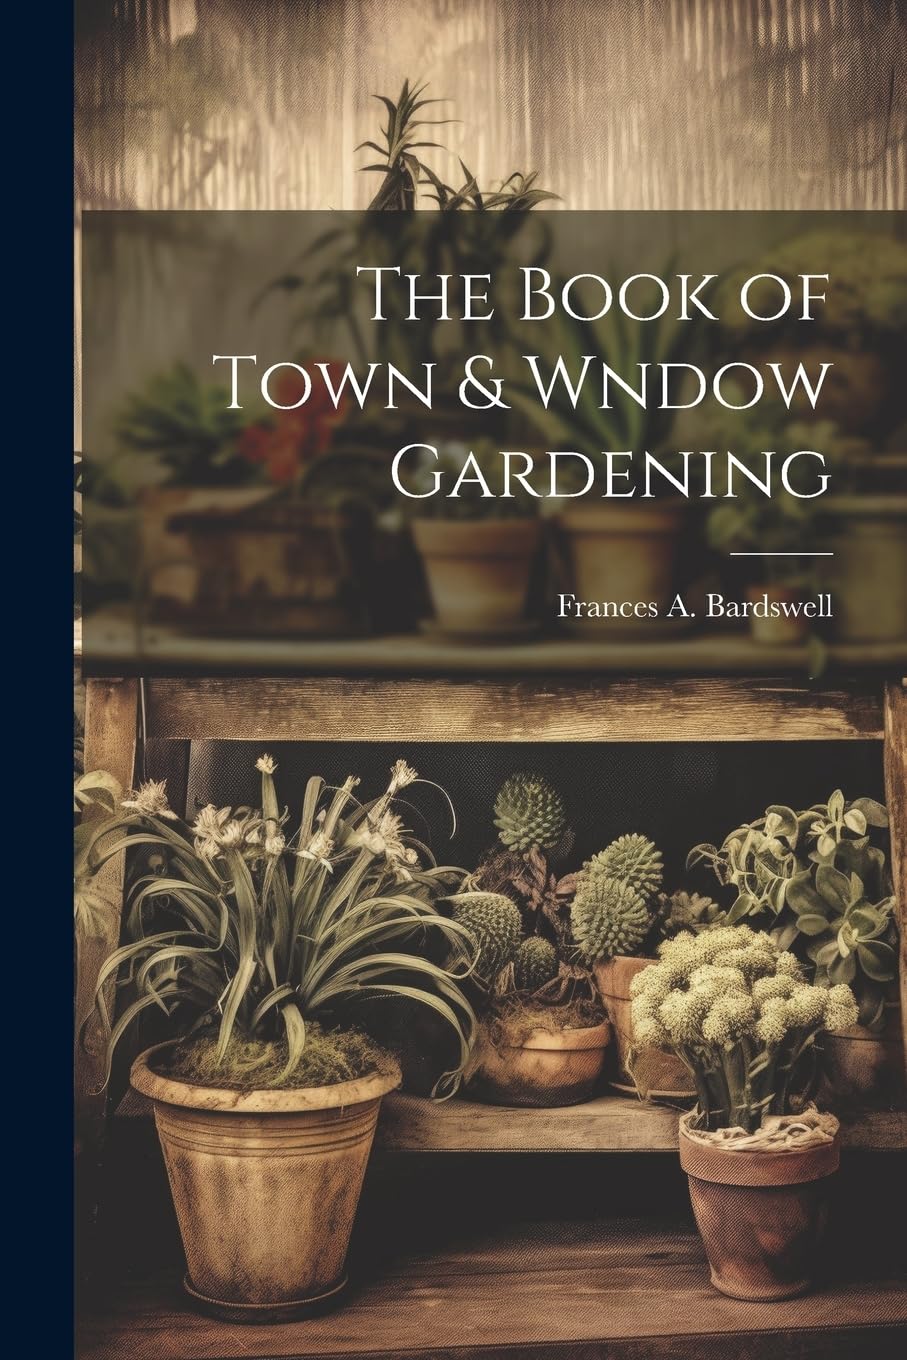 The Book of Town and Wndow Gardening